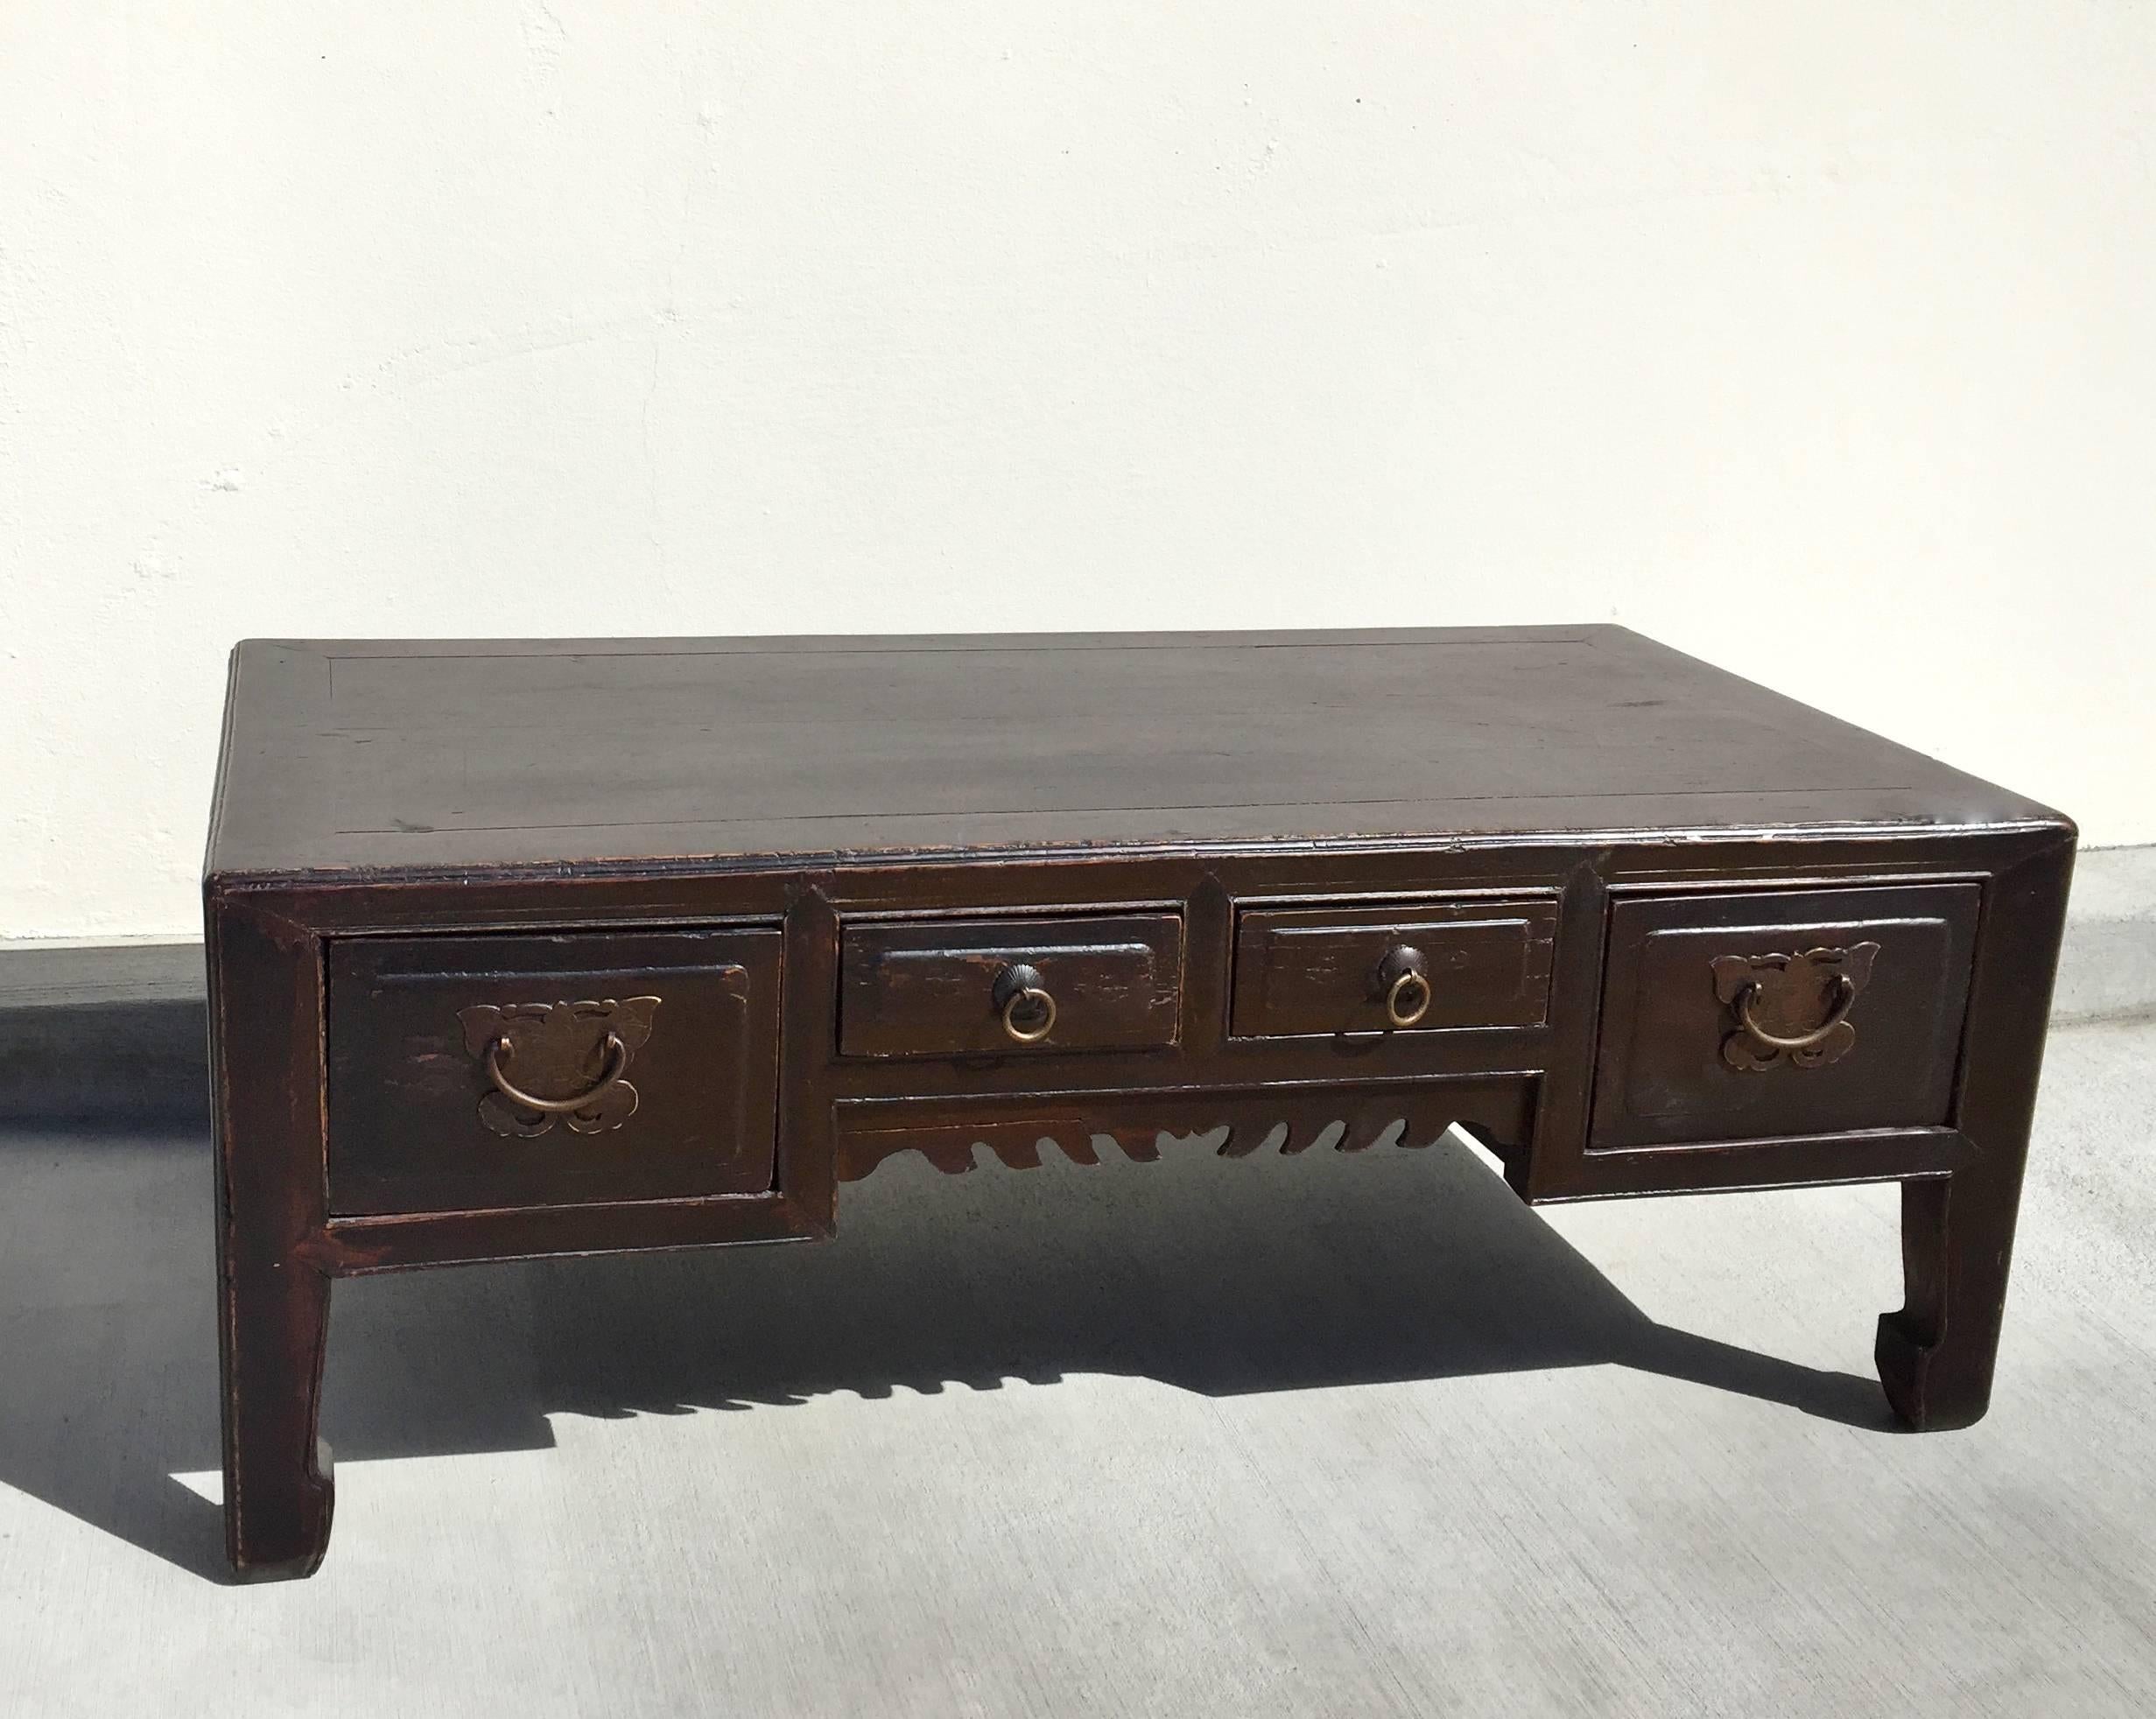 19th century Chinese low table features four full length drawers adorned with bronze butterfly hardware. Beautiful hoof legs give the nod to Ming dynasty. 

Perfect coffee table or as a stand for your sculpture or statues. Back of the table is